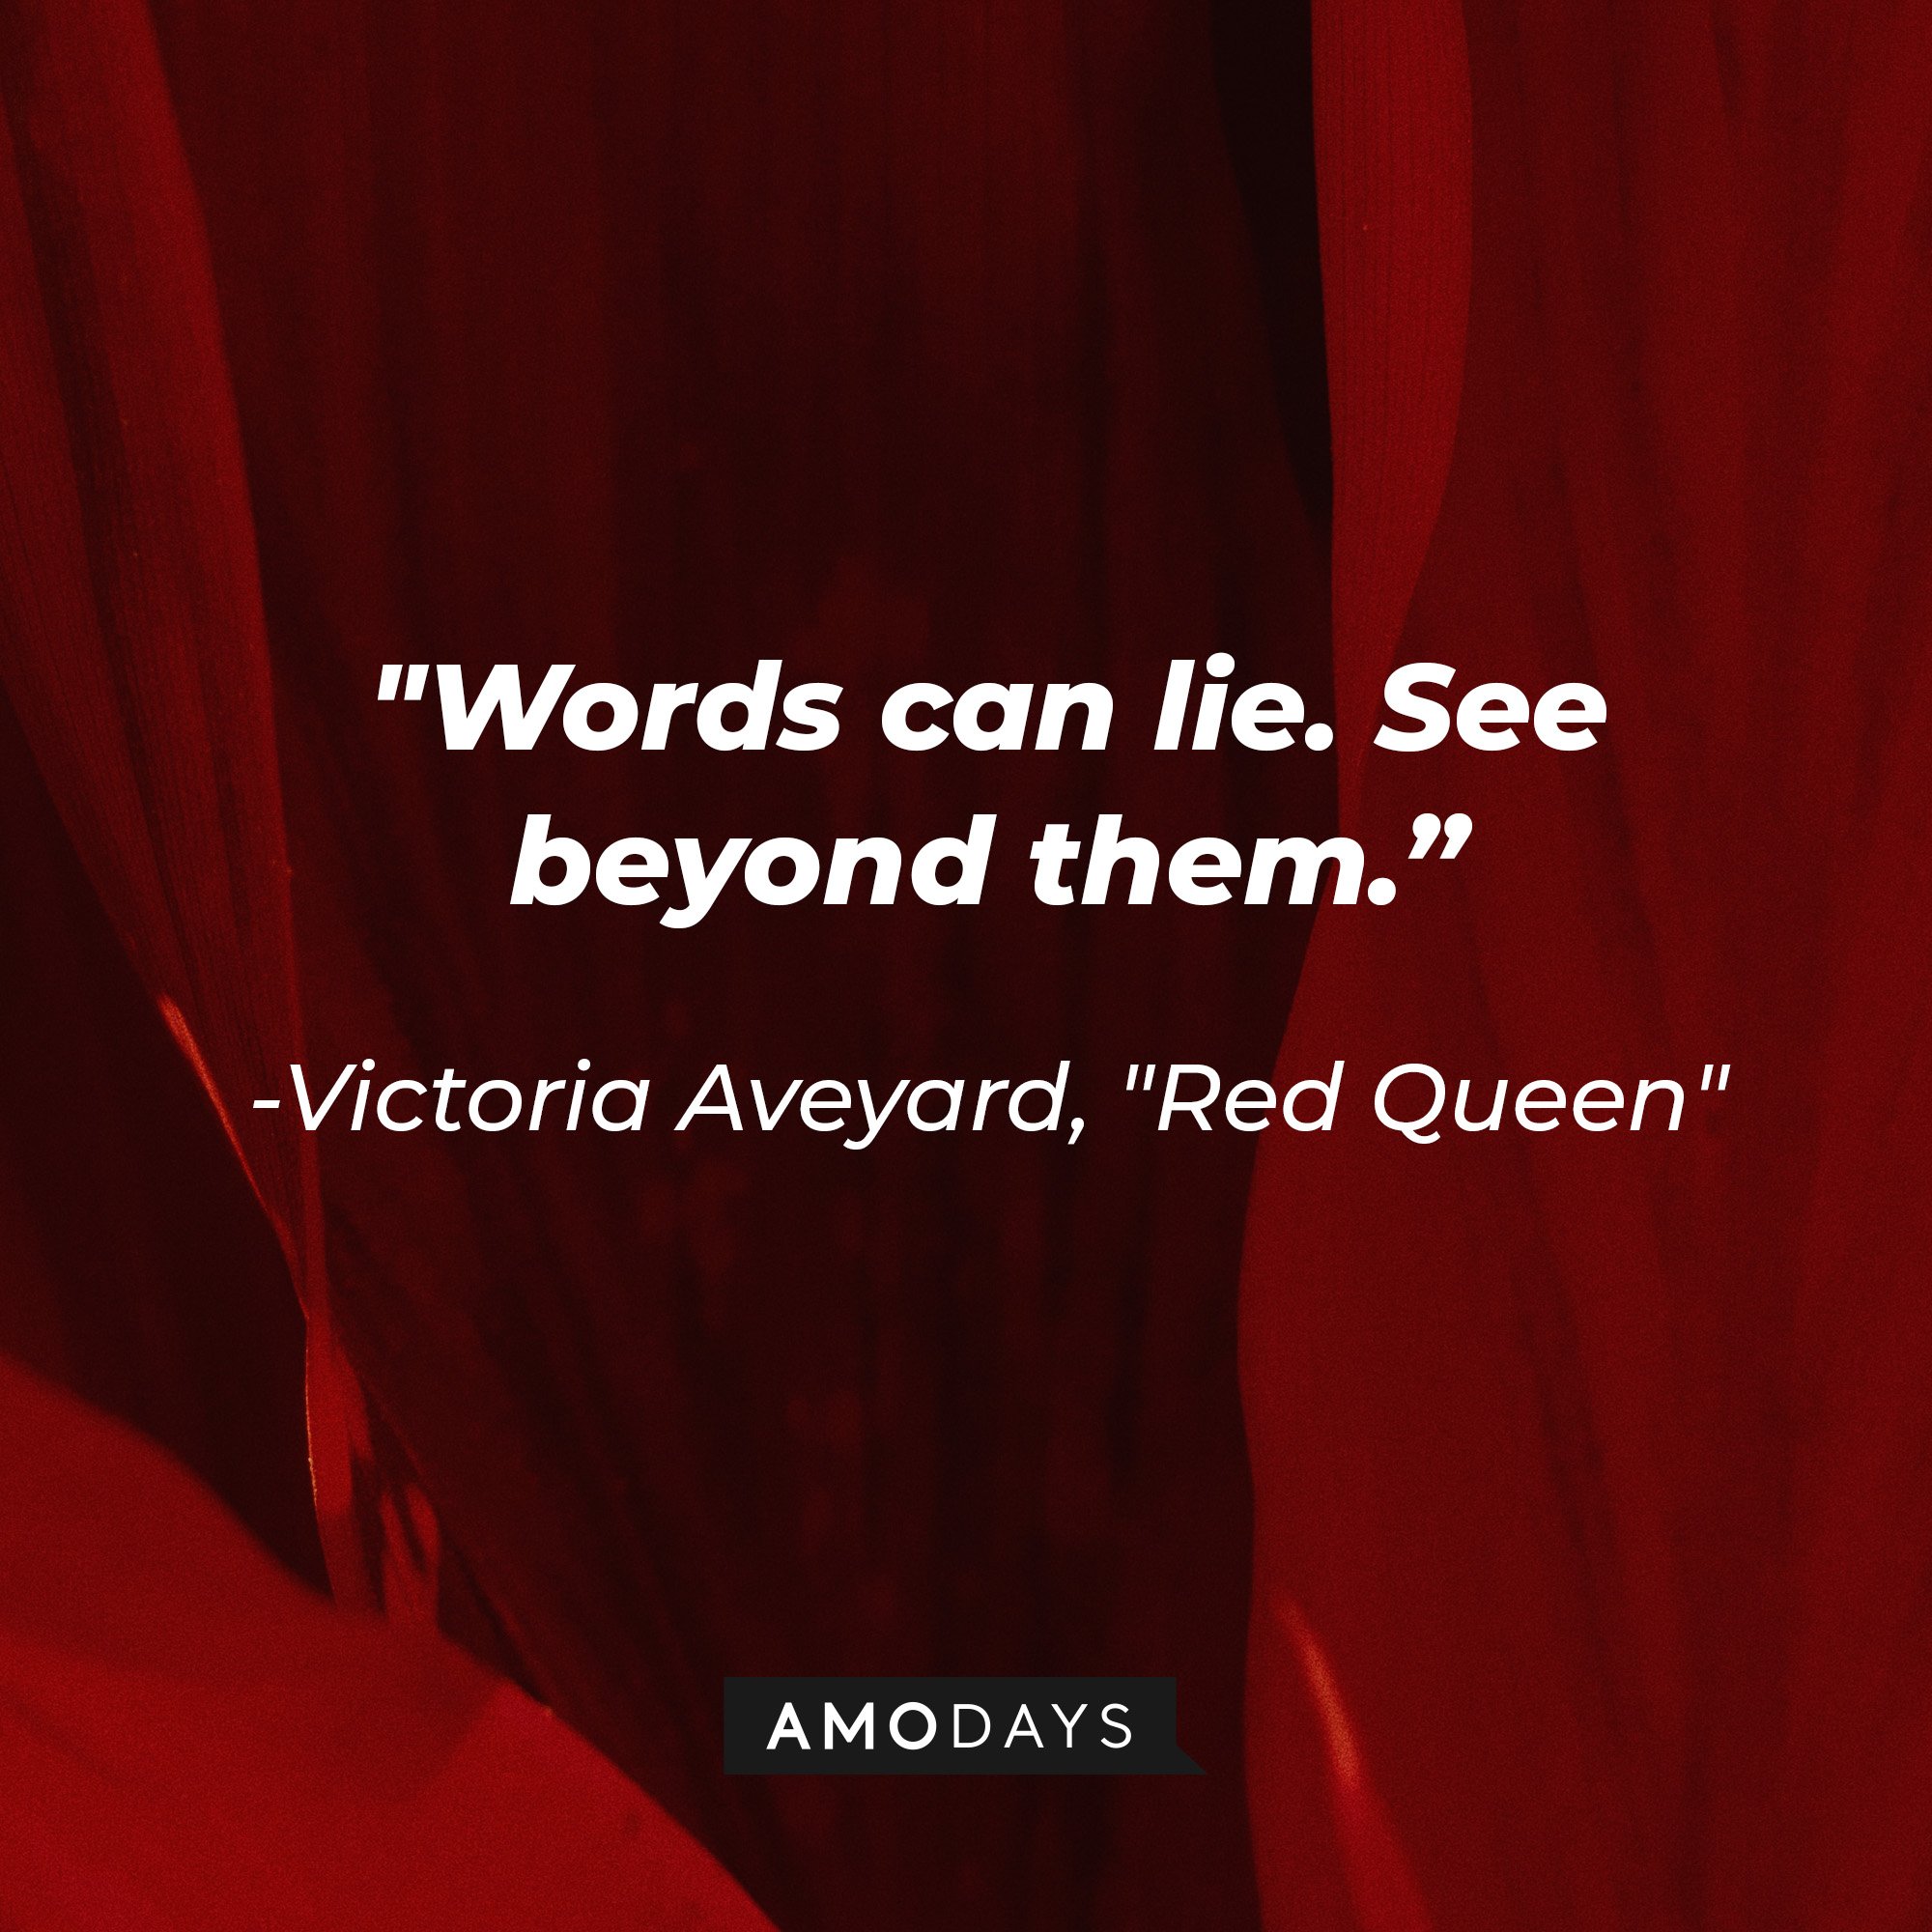 Victoria Aveyard’s quote in “Red Queen”: "Words can lie. See beyond them." | Image: AmoDays